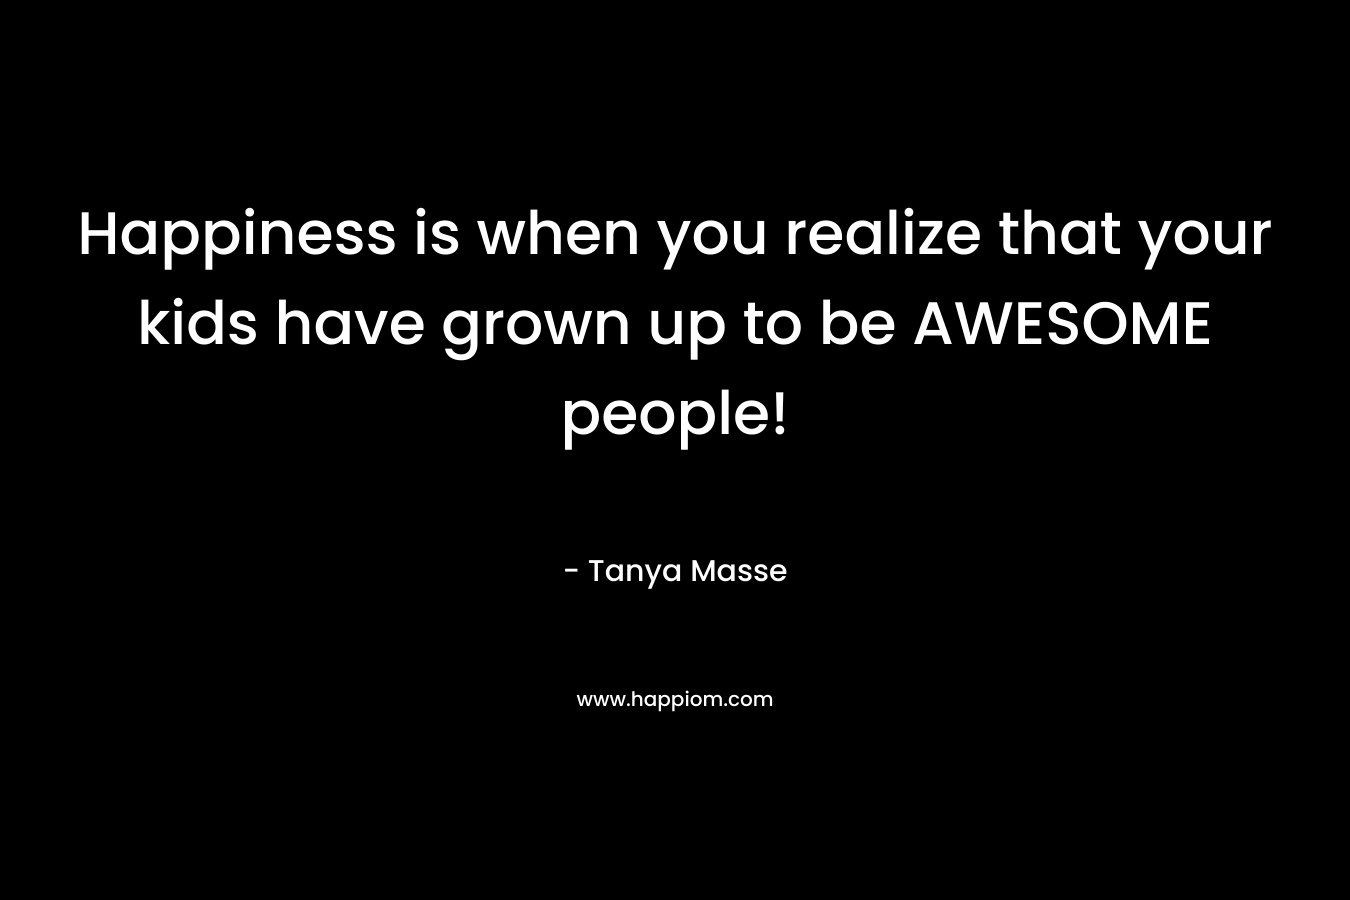 Happiness is when you realize that your kids have grown up to be AWESOME people! – Tanya Masse